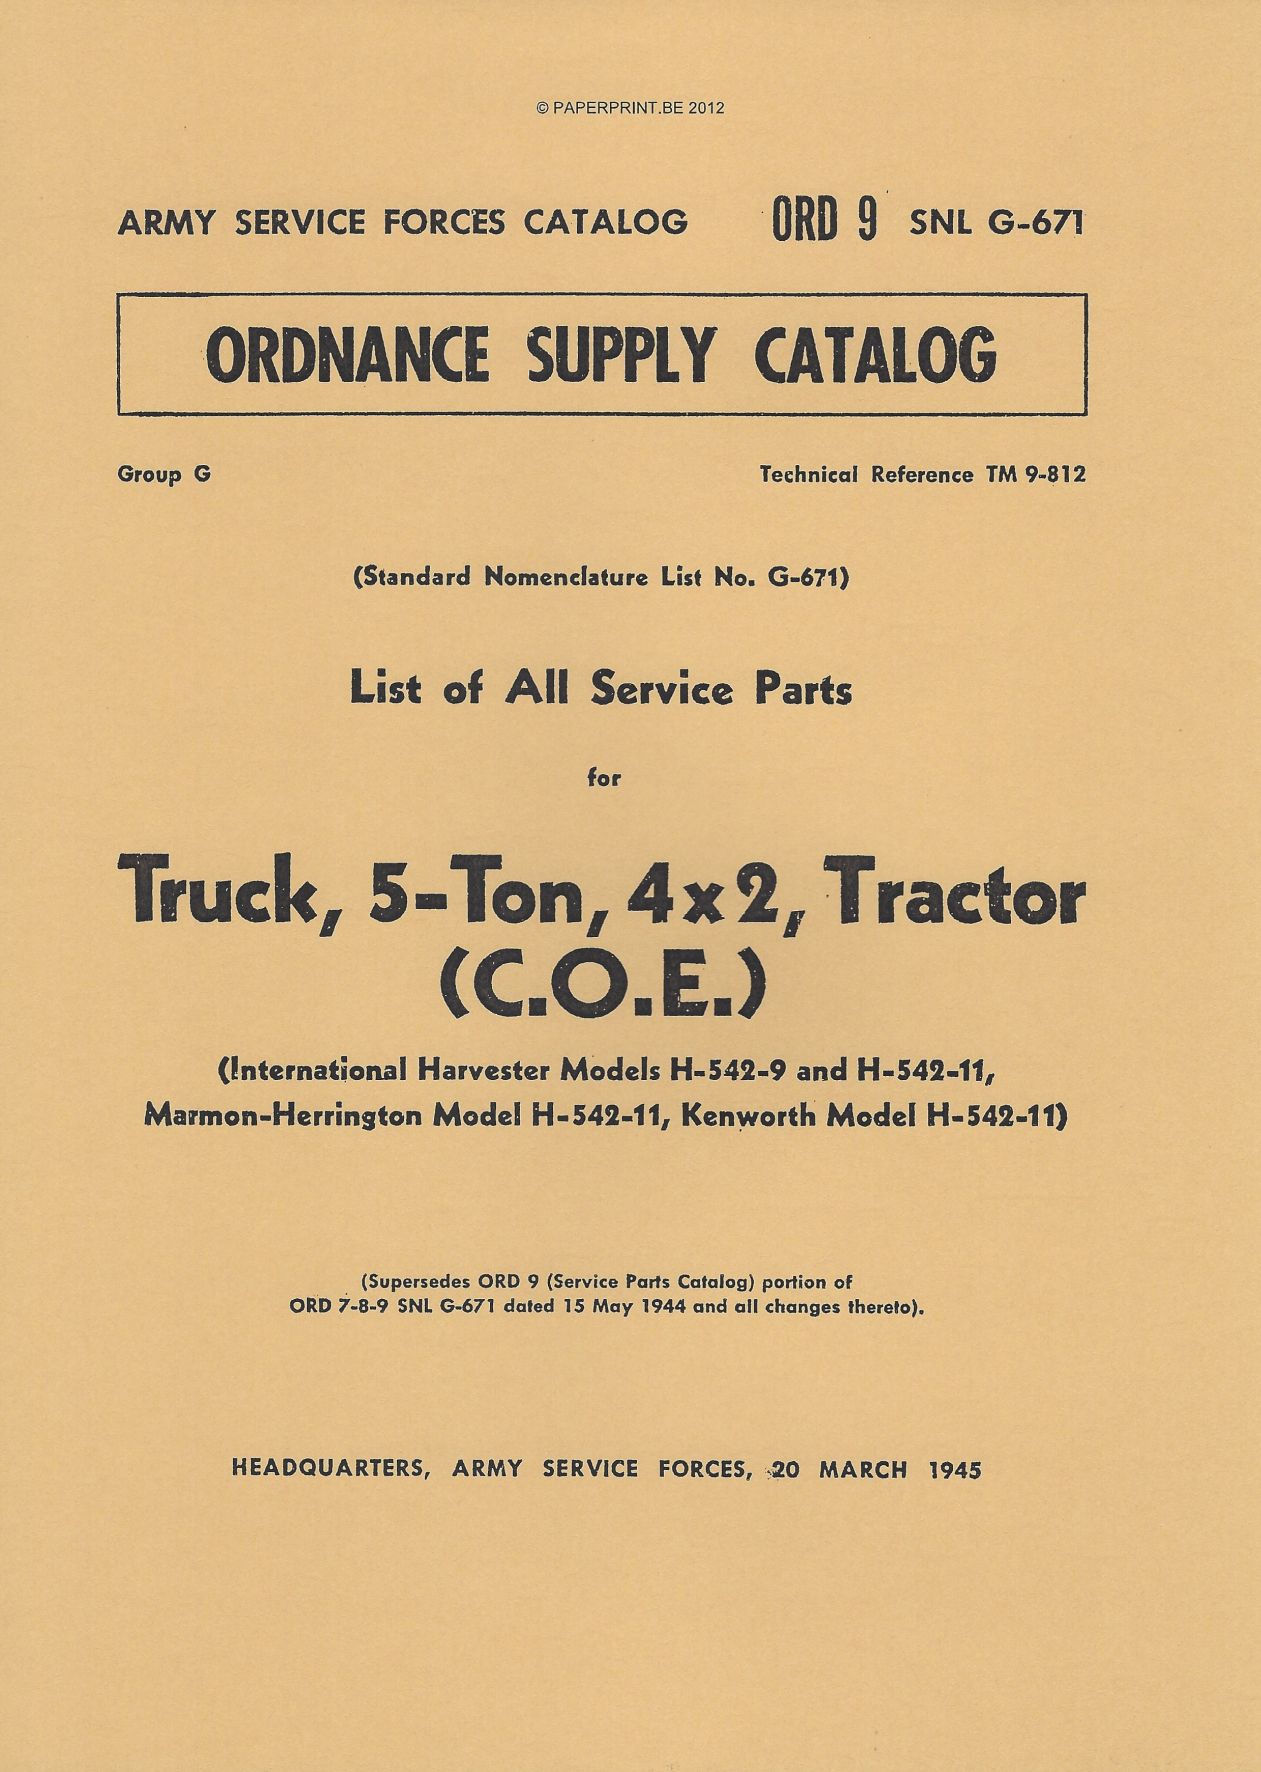 SNL G-671 US PARTS LIST FOR TRUCK, 5-TON, 4x2, TRACTOR (C.O.E.)